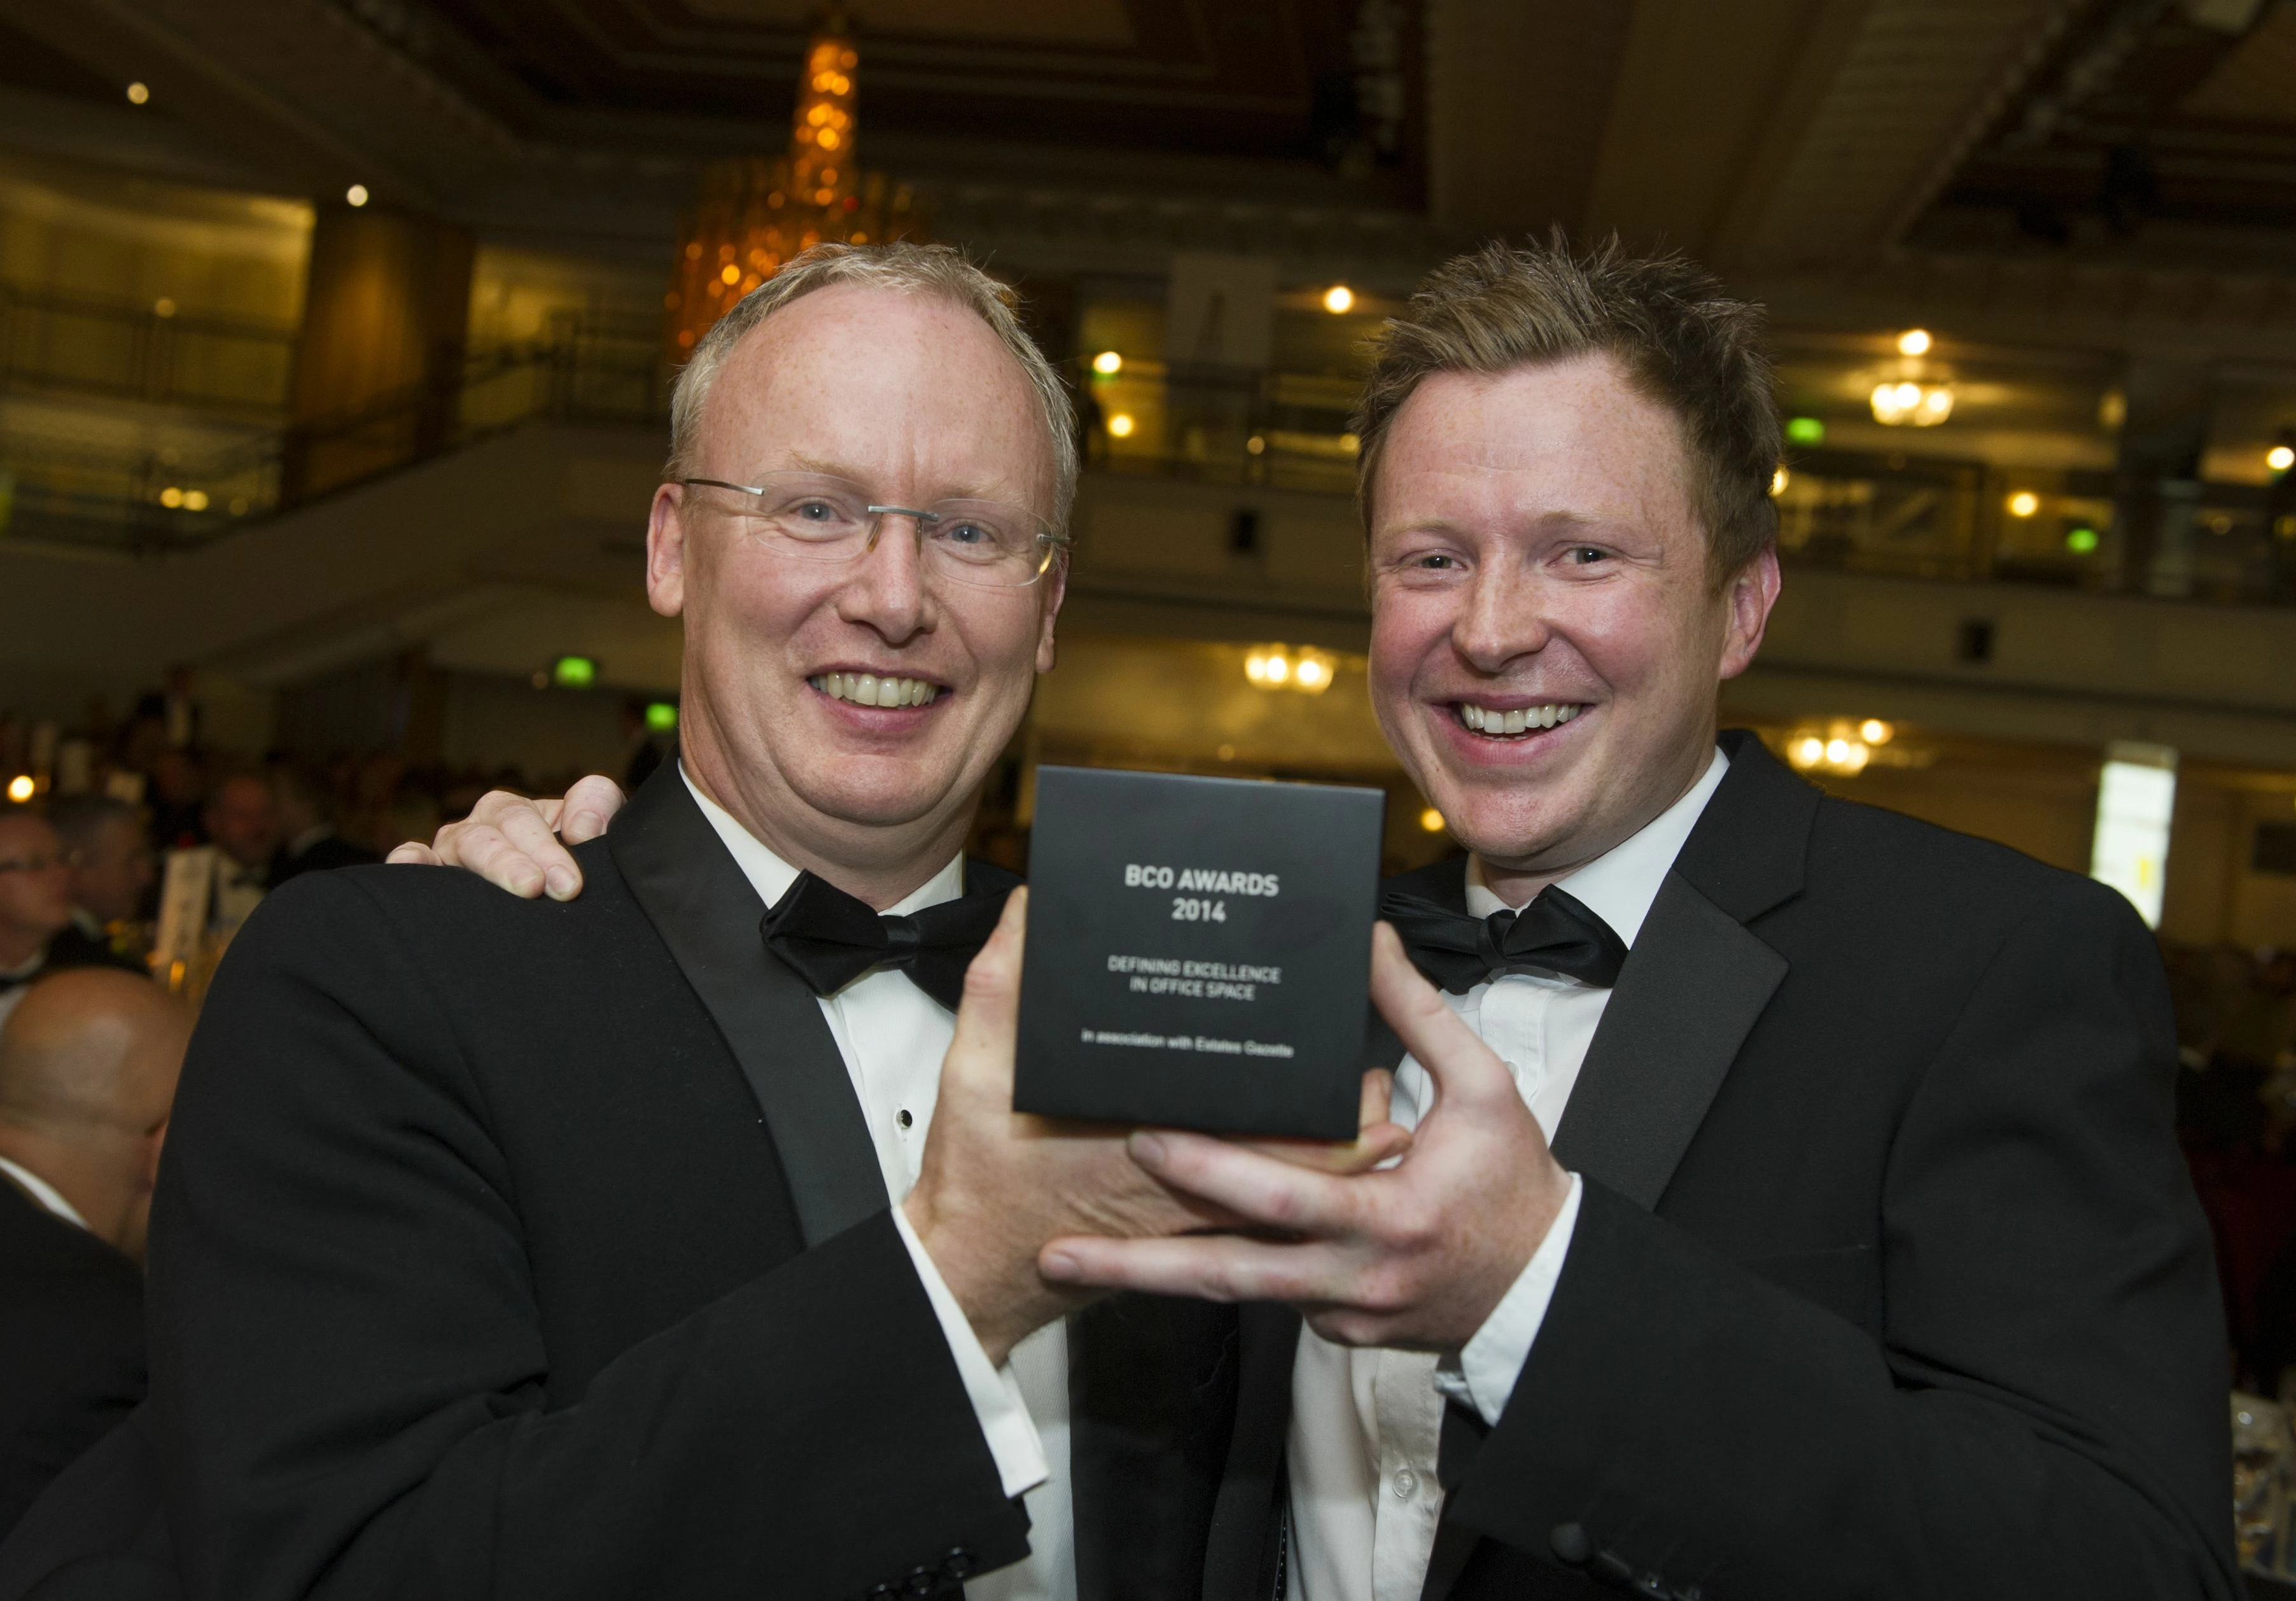 FaulknerBrowns, winners of the BCO's National Corporate Workplace of the Year